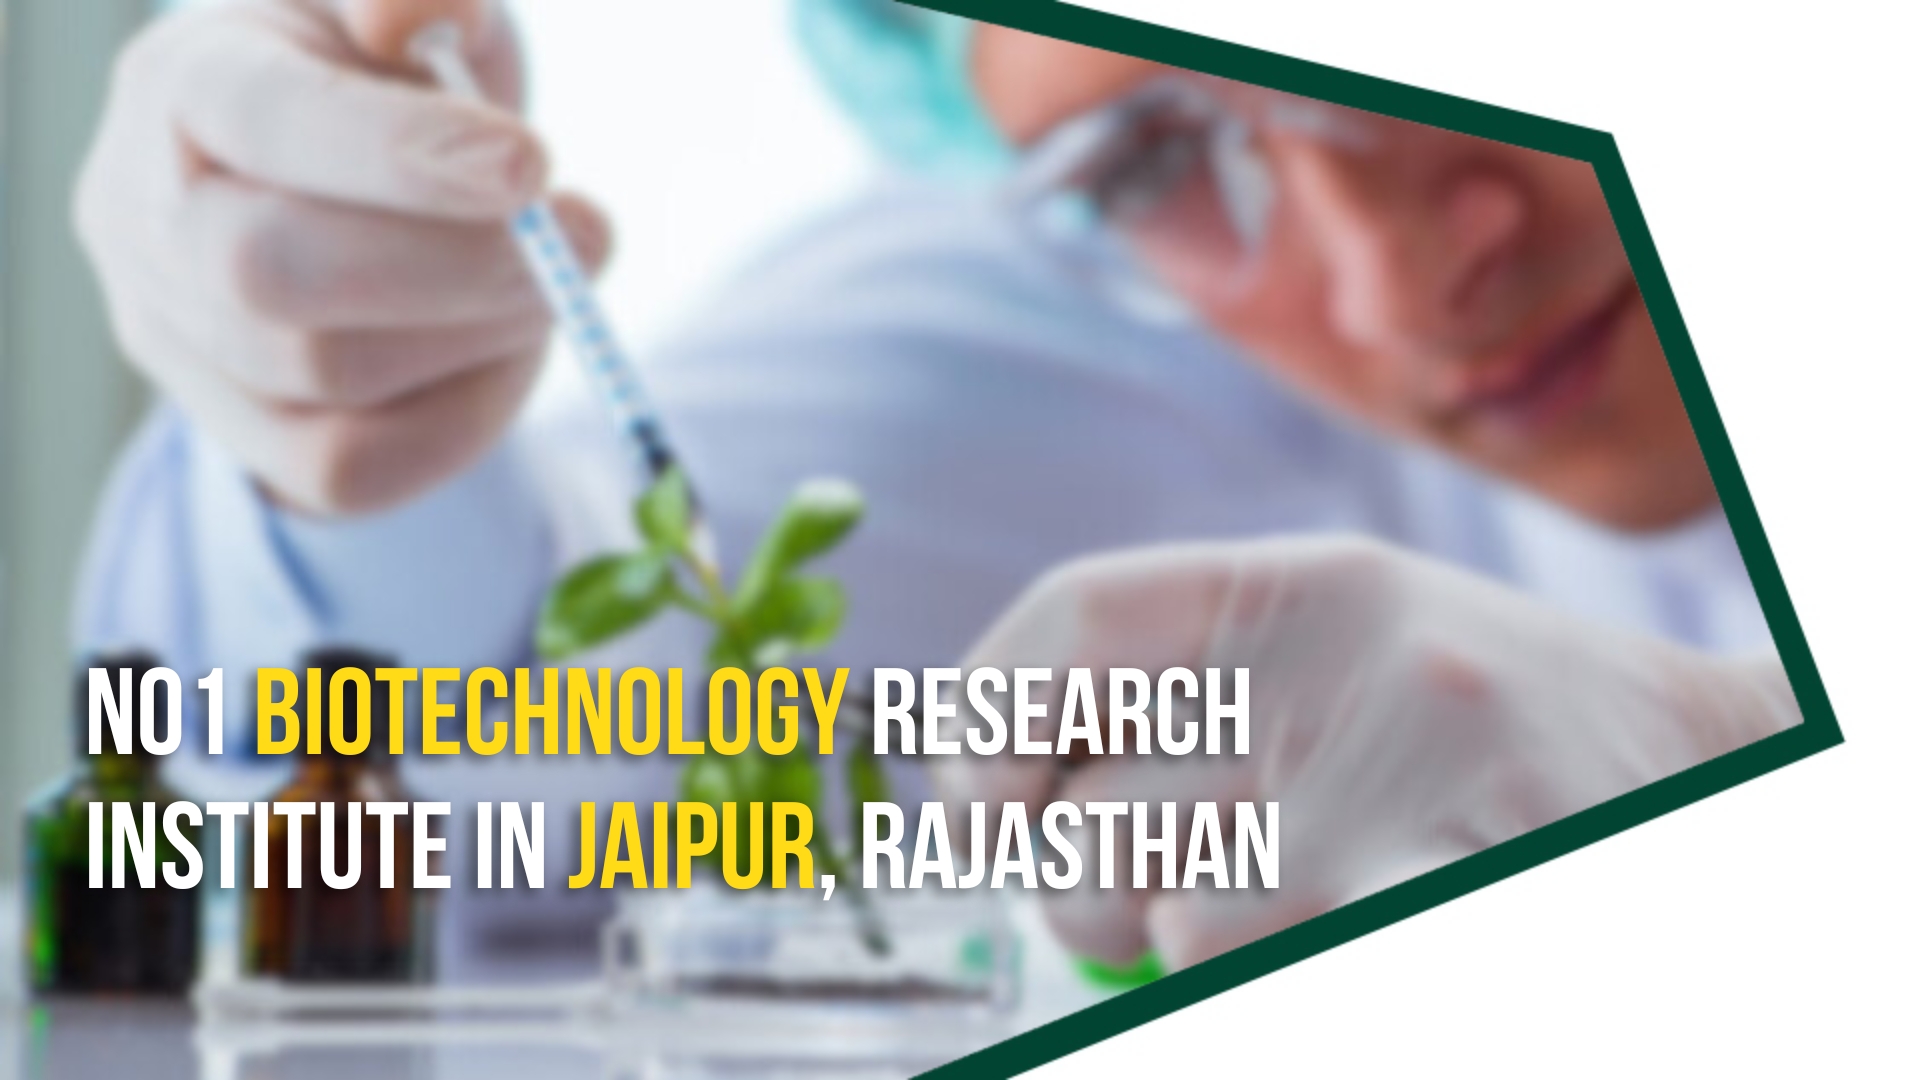 No1 Biotechnology Research Institute in Jaipur, Rajasthan